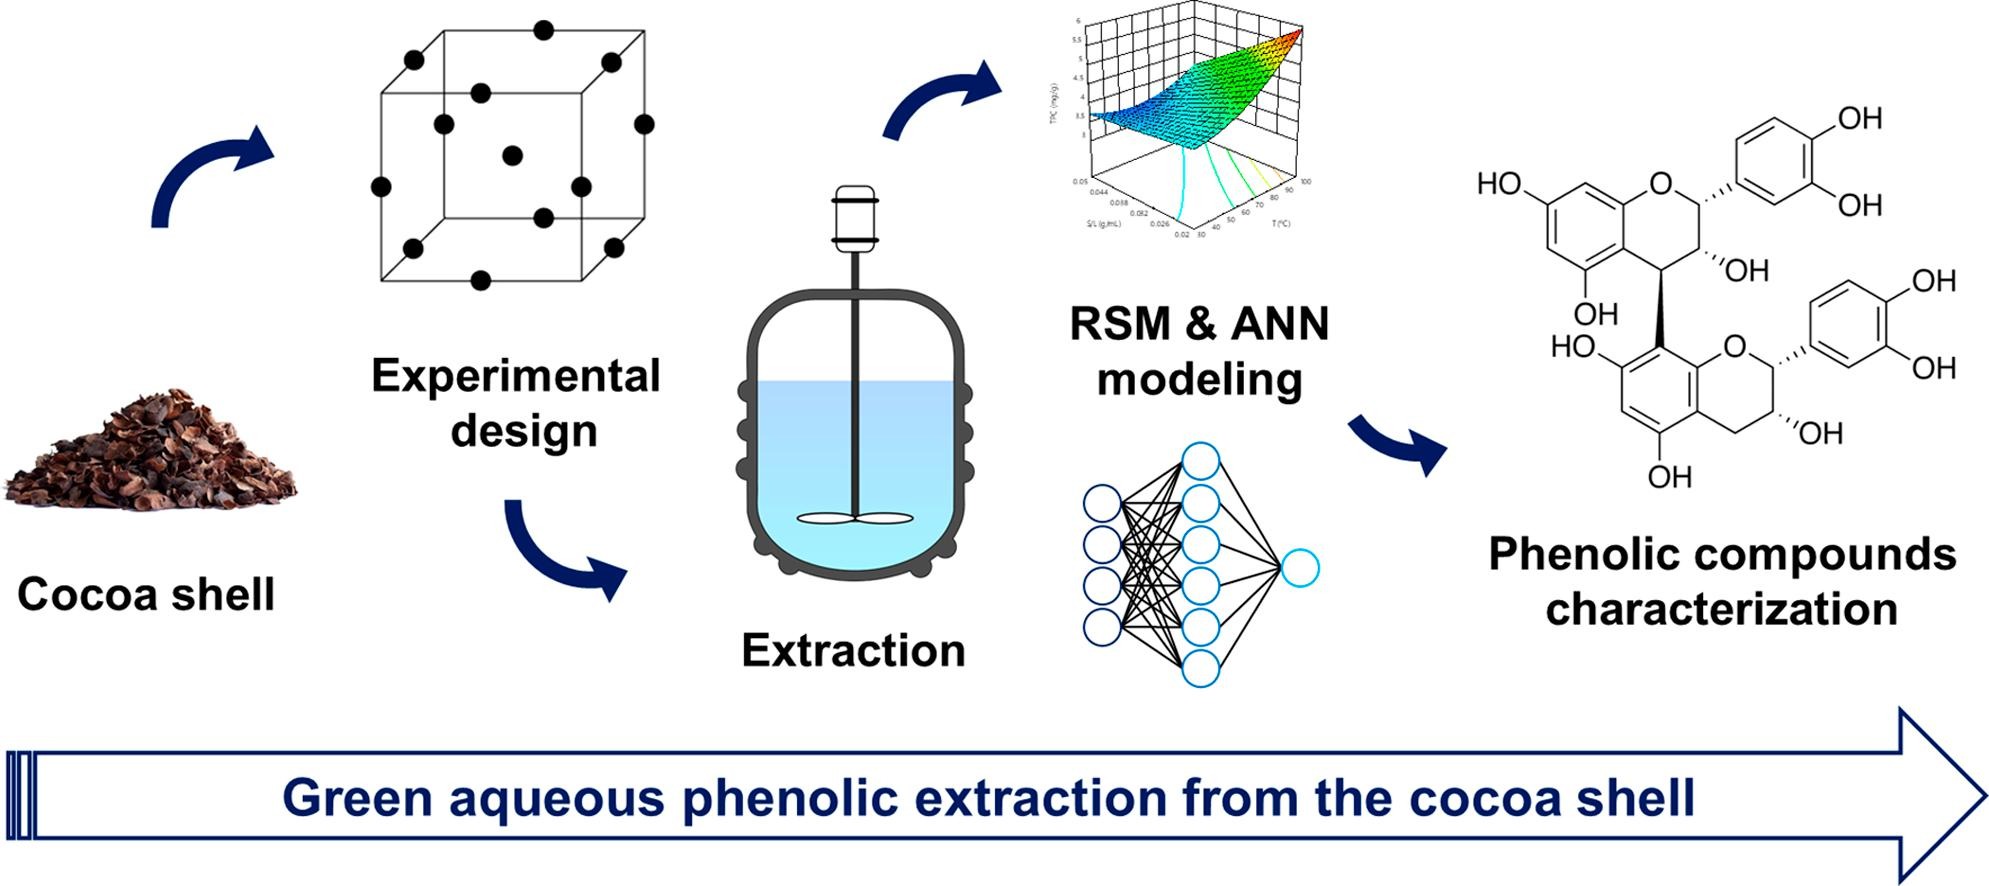 Extraction of phenolic compounds from cocoa shell: Modeling using response surface methodology and artificial neural networks